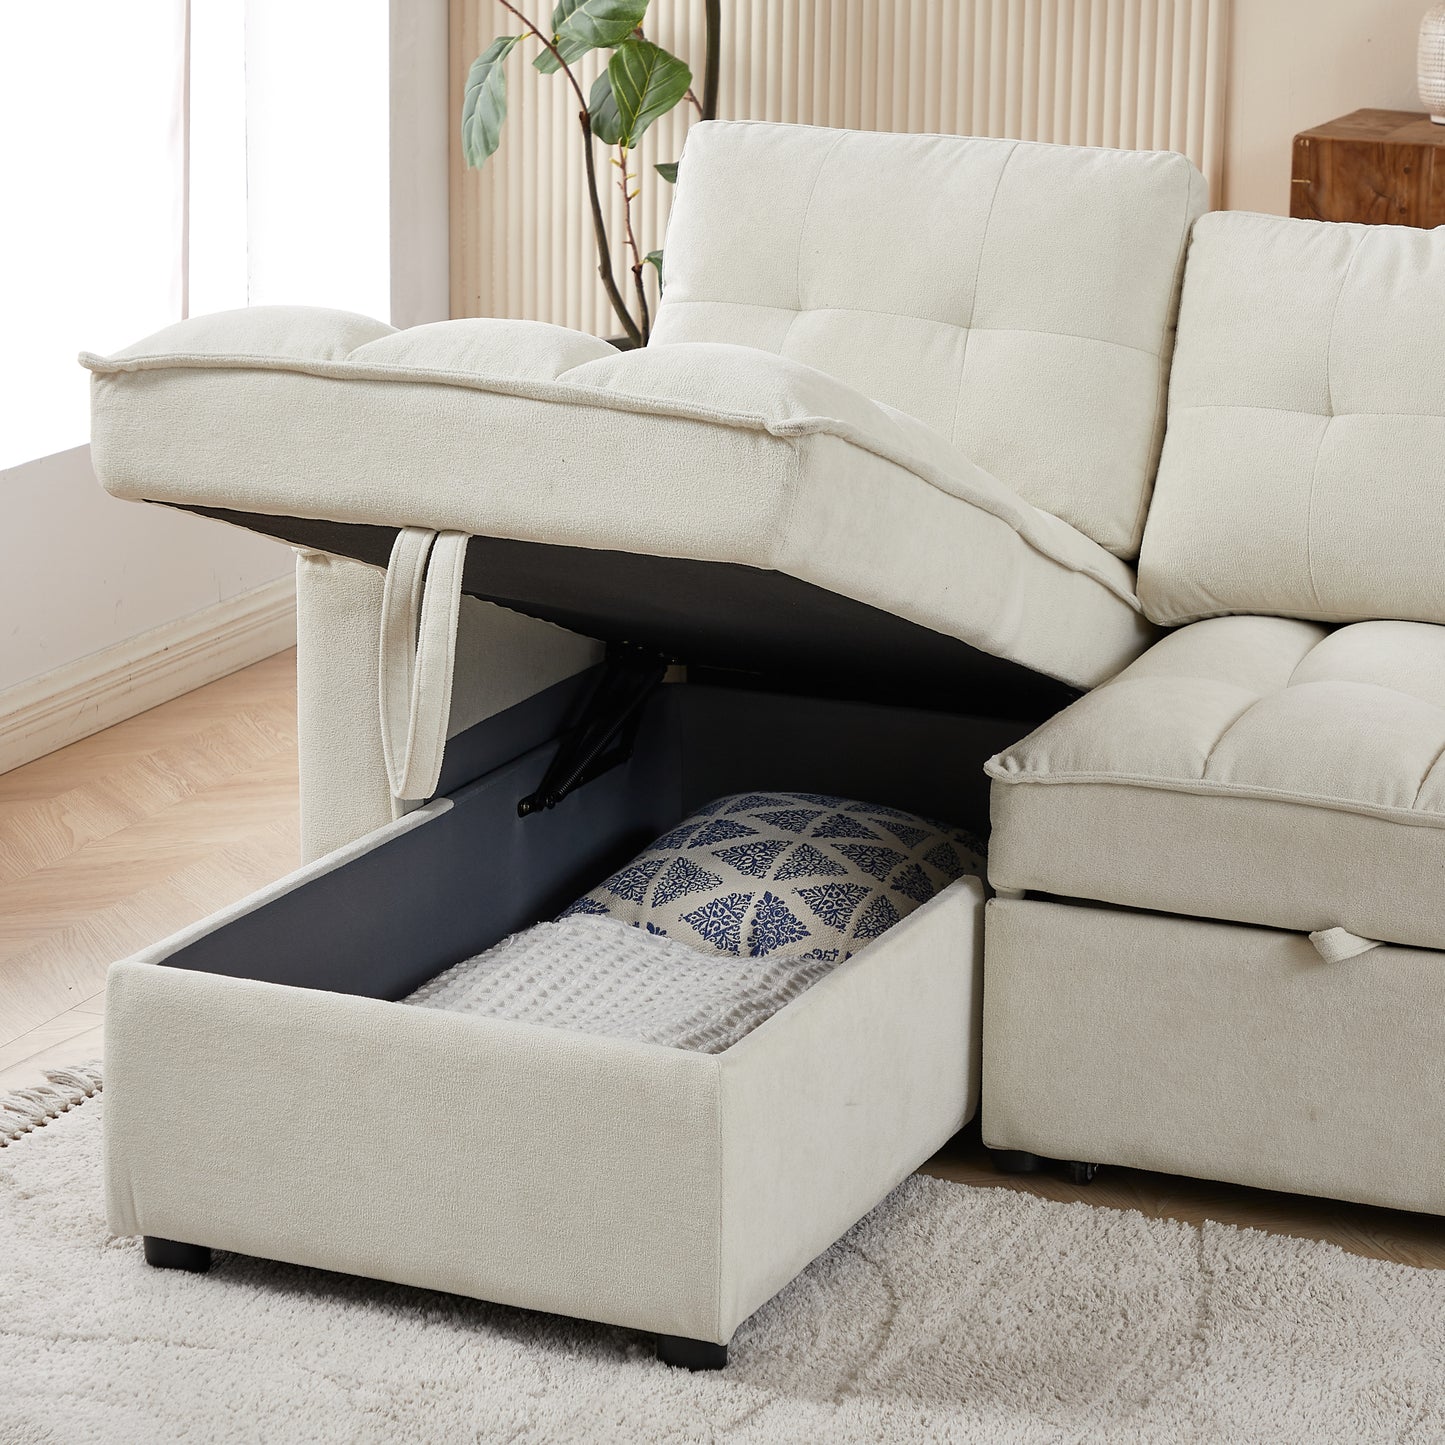 MH 78.75" Reclining Sofa, Pull-Out Sofa Bed with USB and tape-c charging ports, L-Shaped Sectional Sofa with Reclining Storage and Arm Side Organizer Pocket Features, Living Room Comfort Sofa